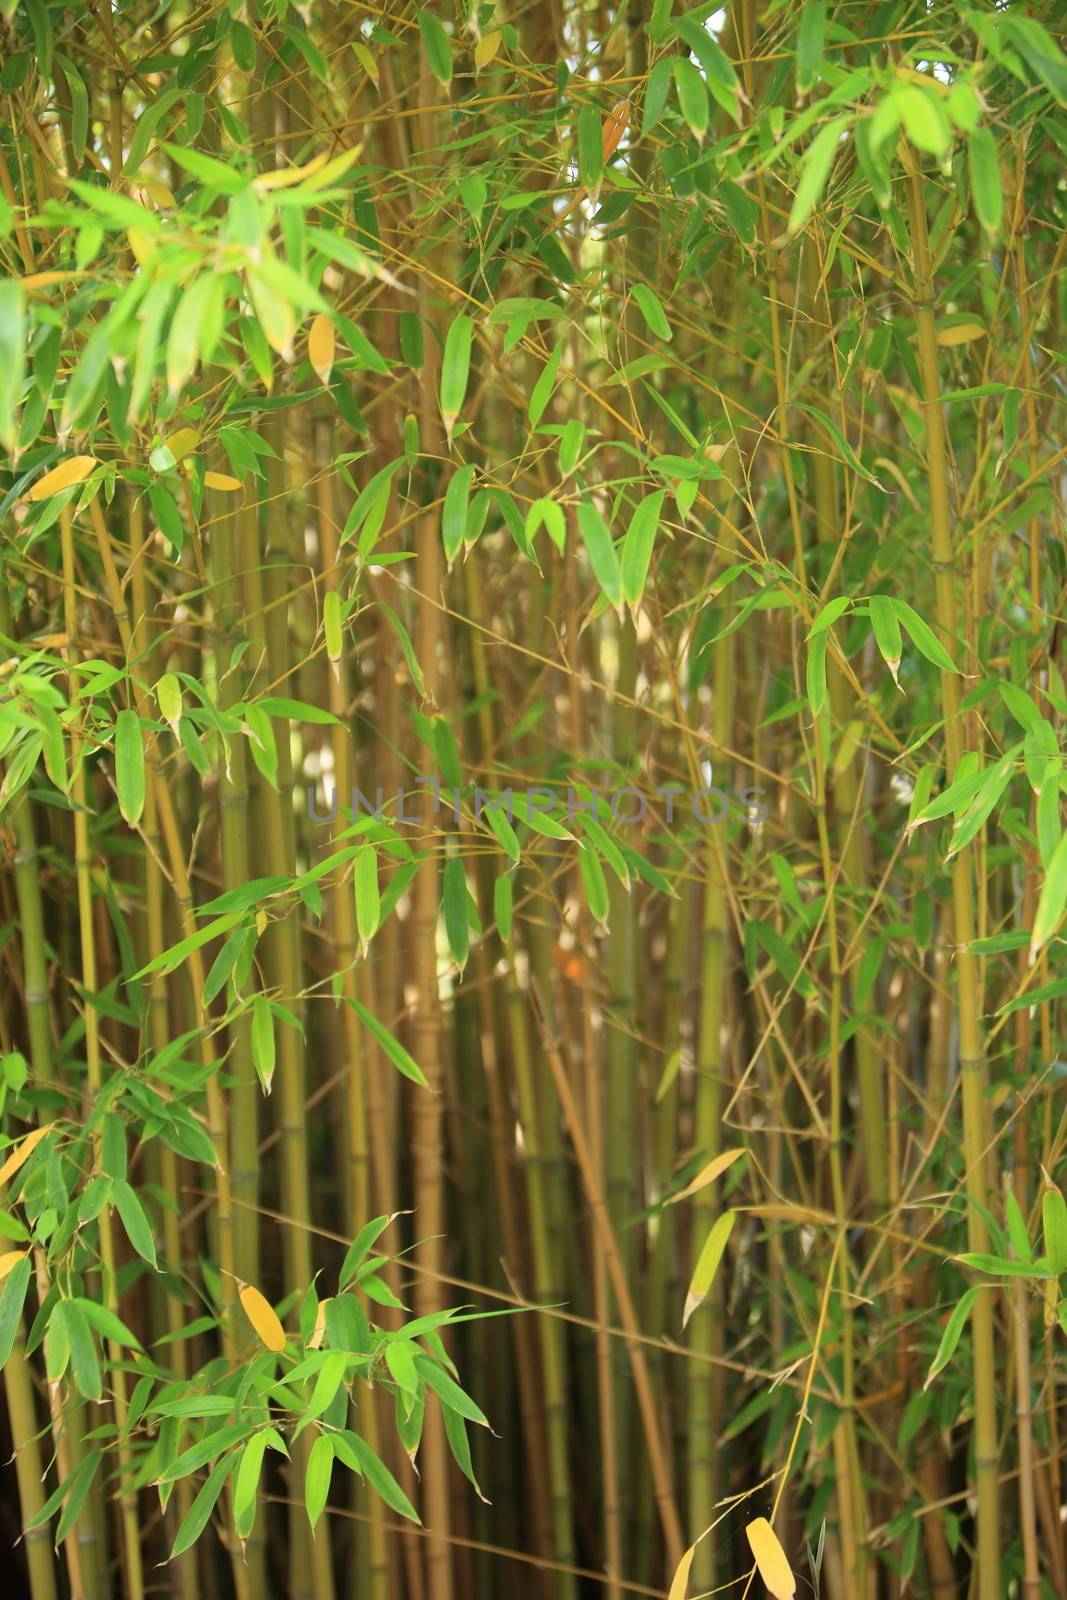 Stand of ornamental bamboo by Farina6000